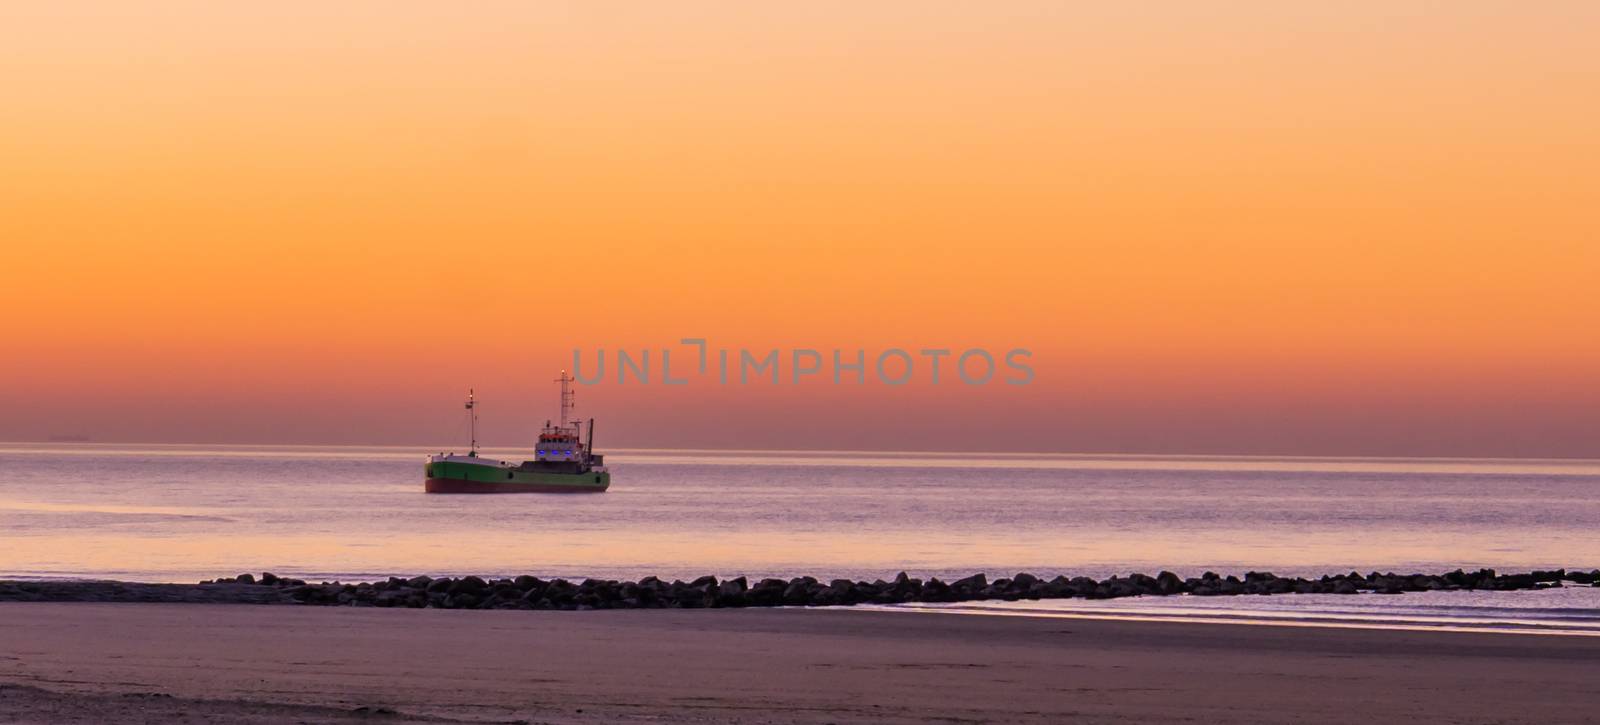 lighted ship sailing in the sea at sunset, the Belgian coast, nature and transport background by charlottebleijenberg